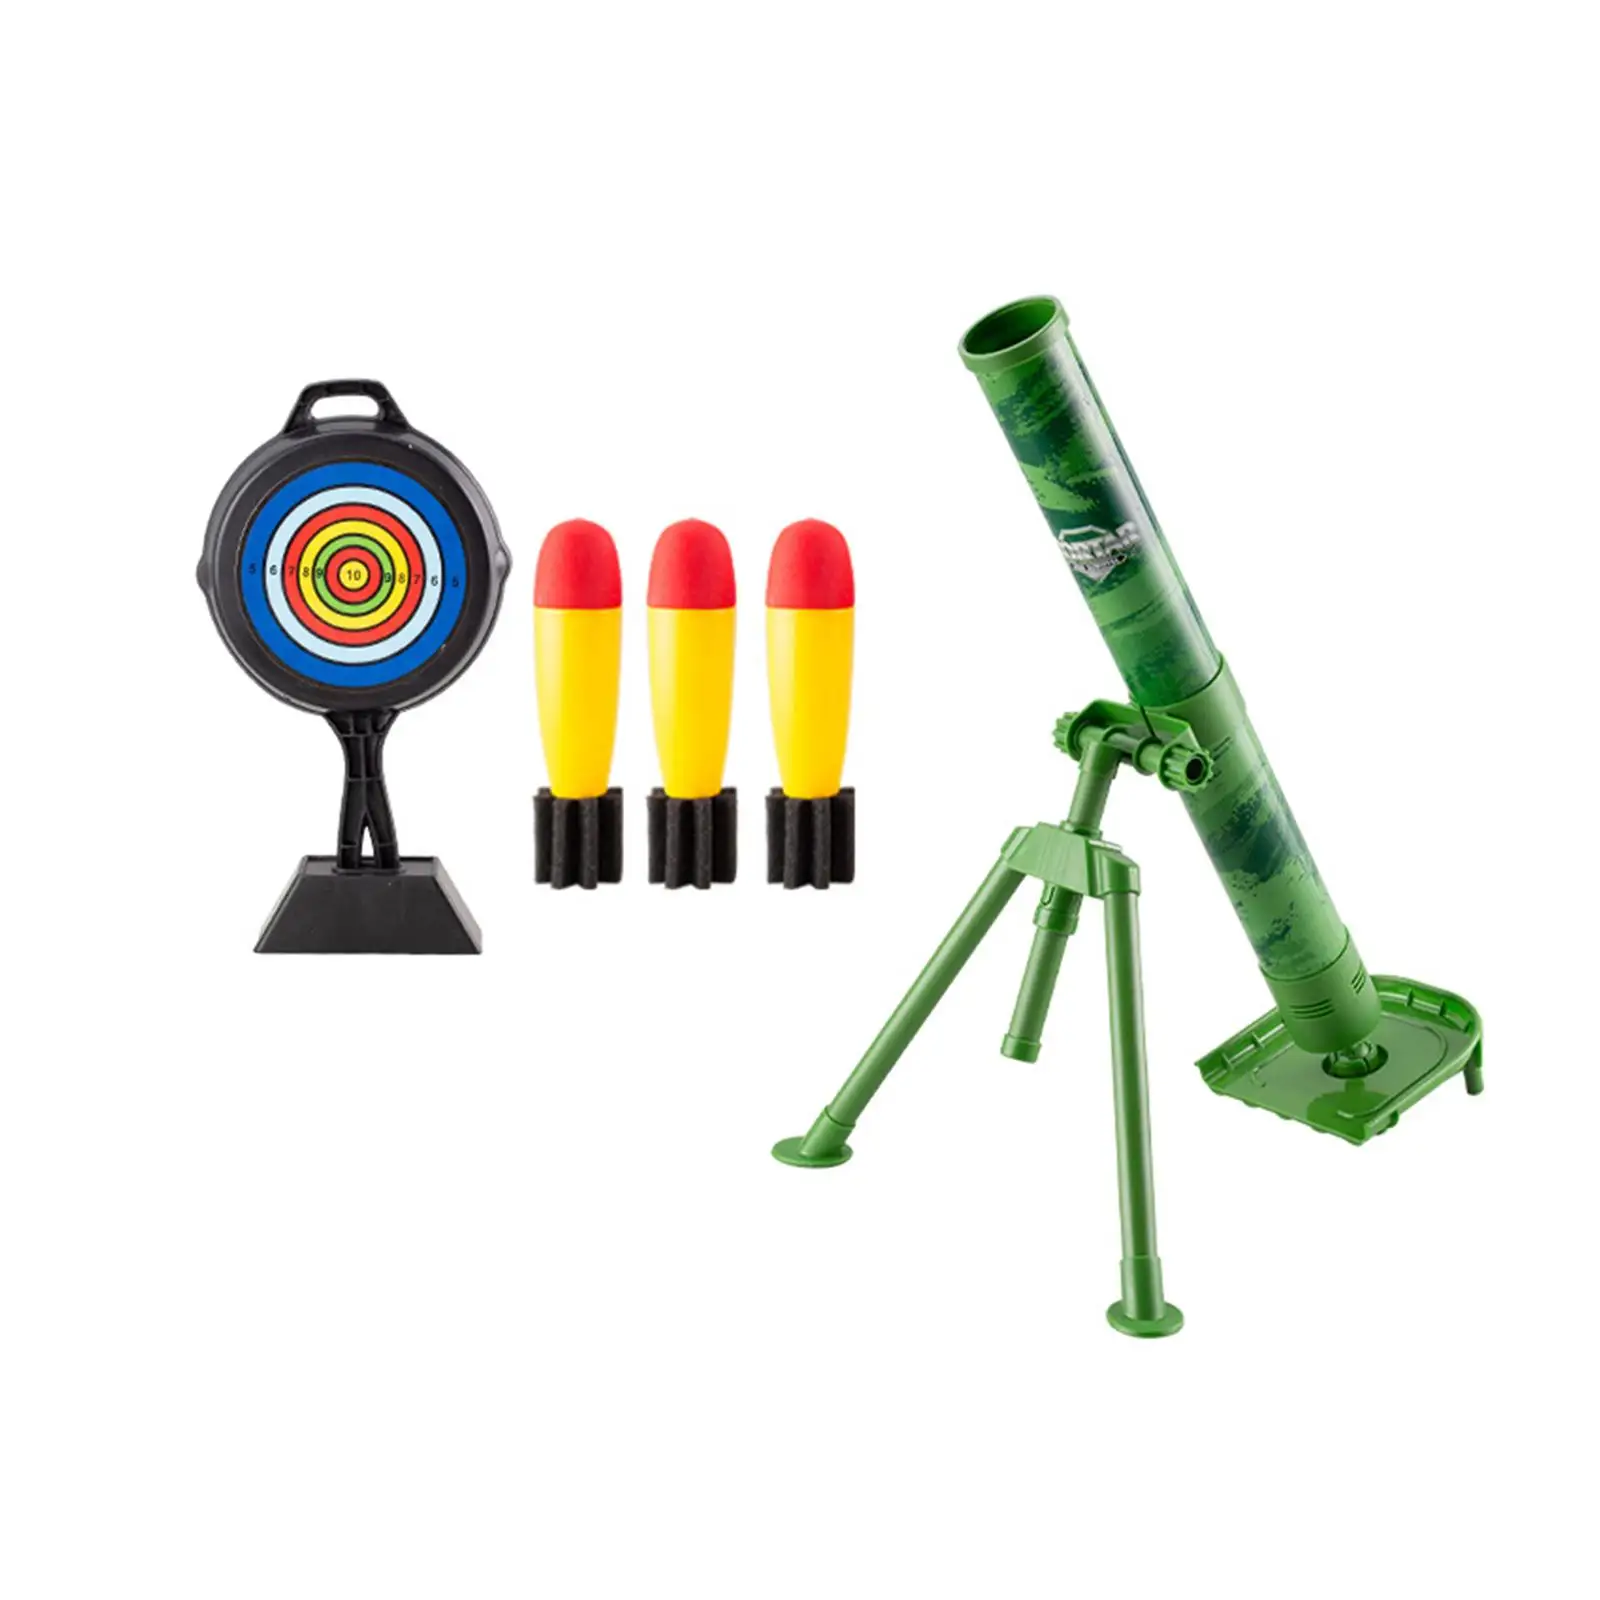 Mortar Launcher Toy Game Kits Interactive Games Game Launcher Set for Kids Boys and Girls Birthday Present